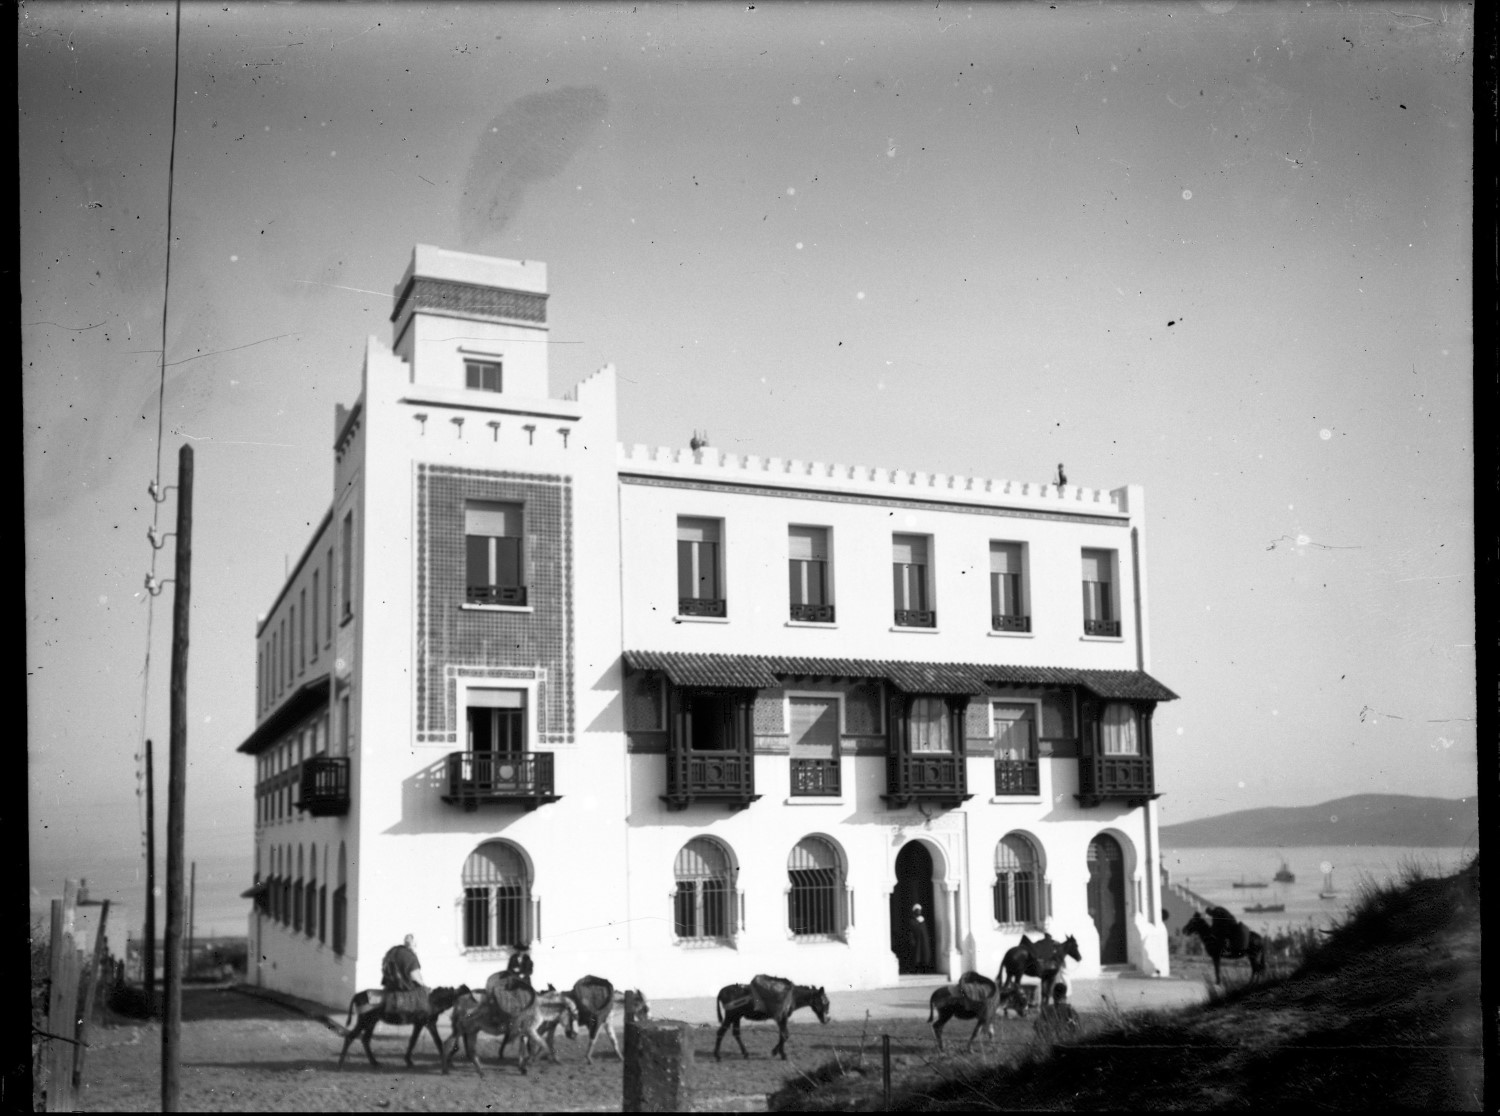 View of the facade with awnings, pack animals passing in front. A clear view toward the bay. 